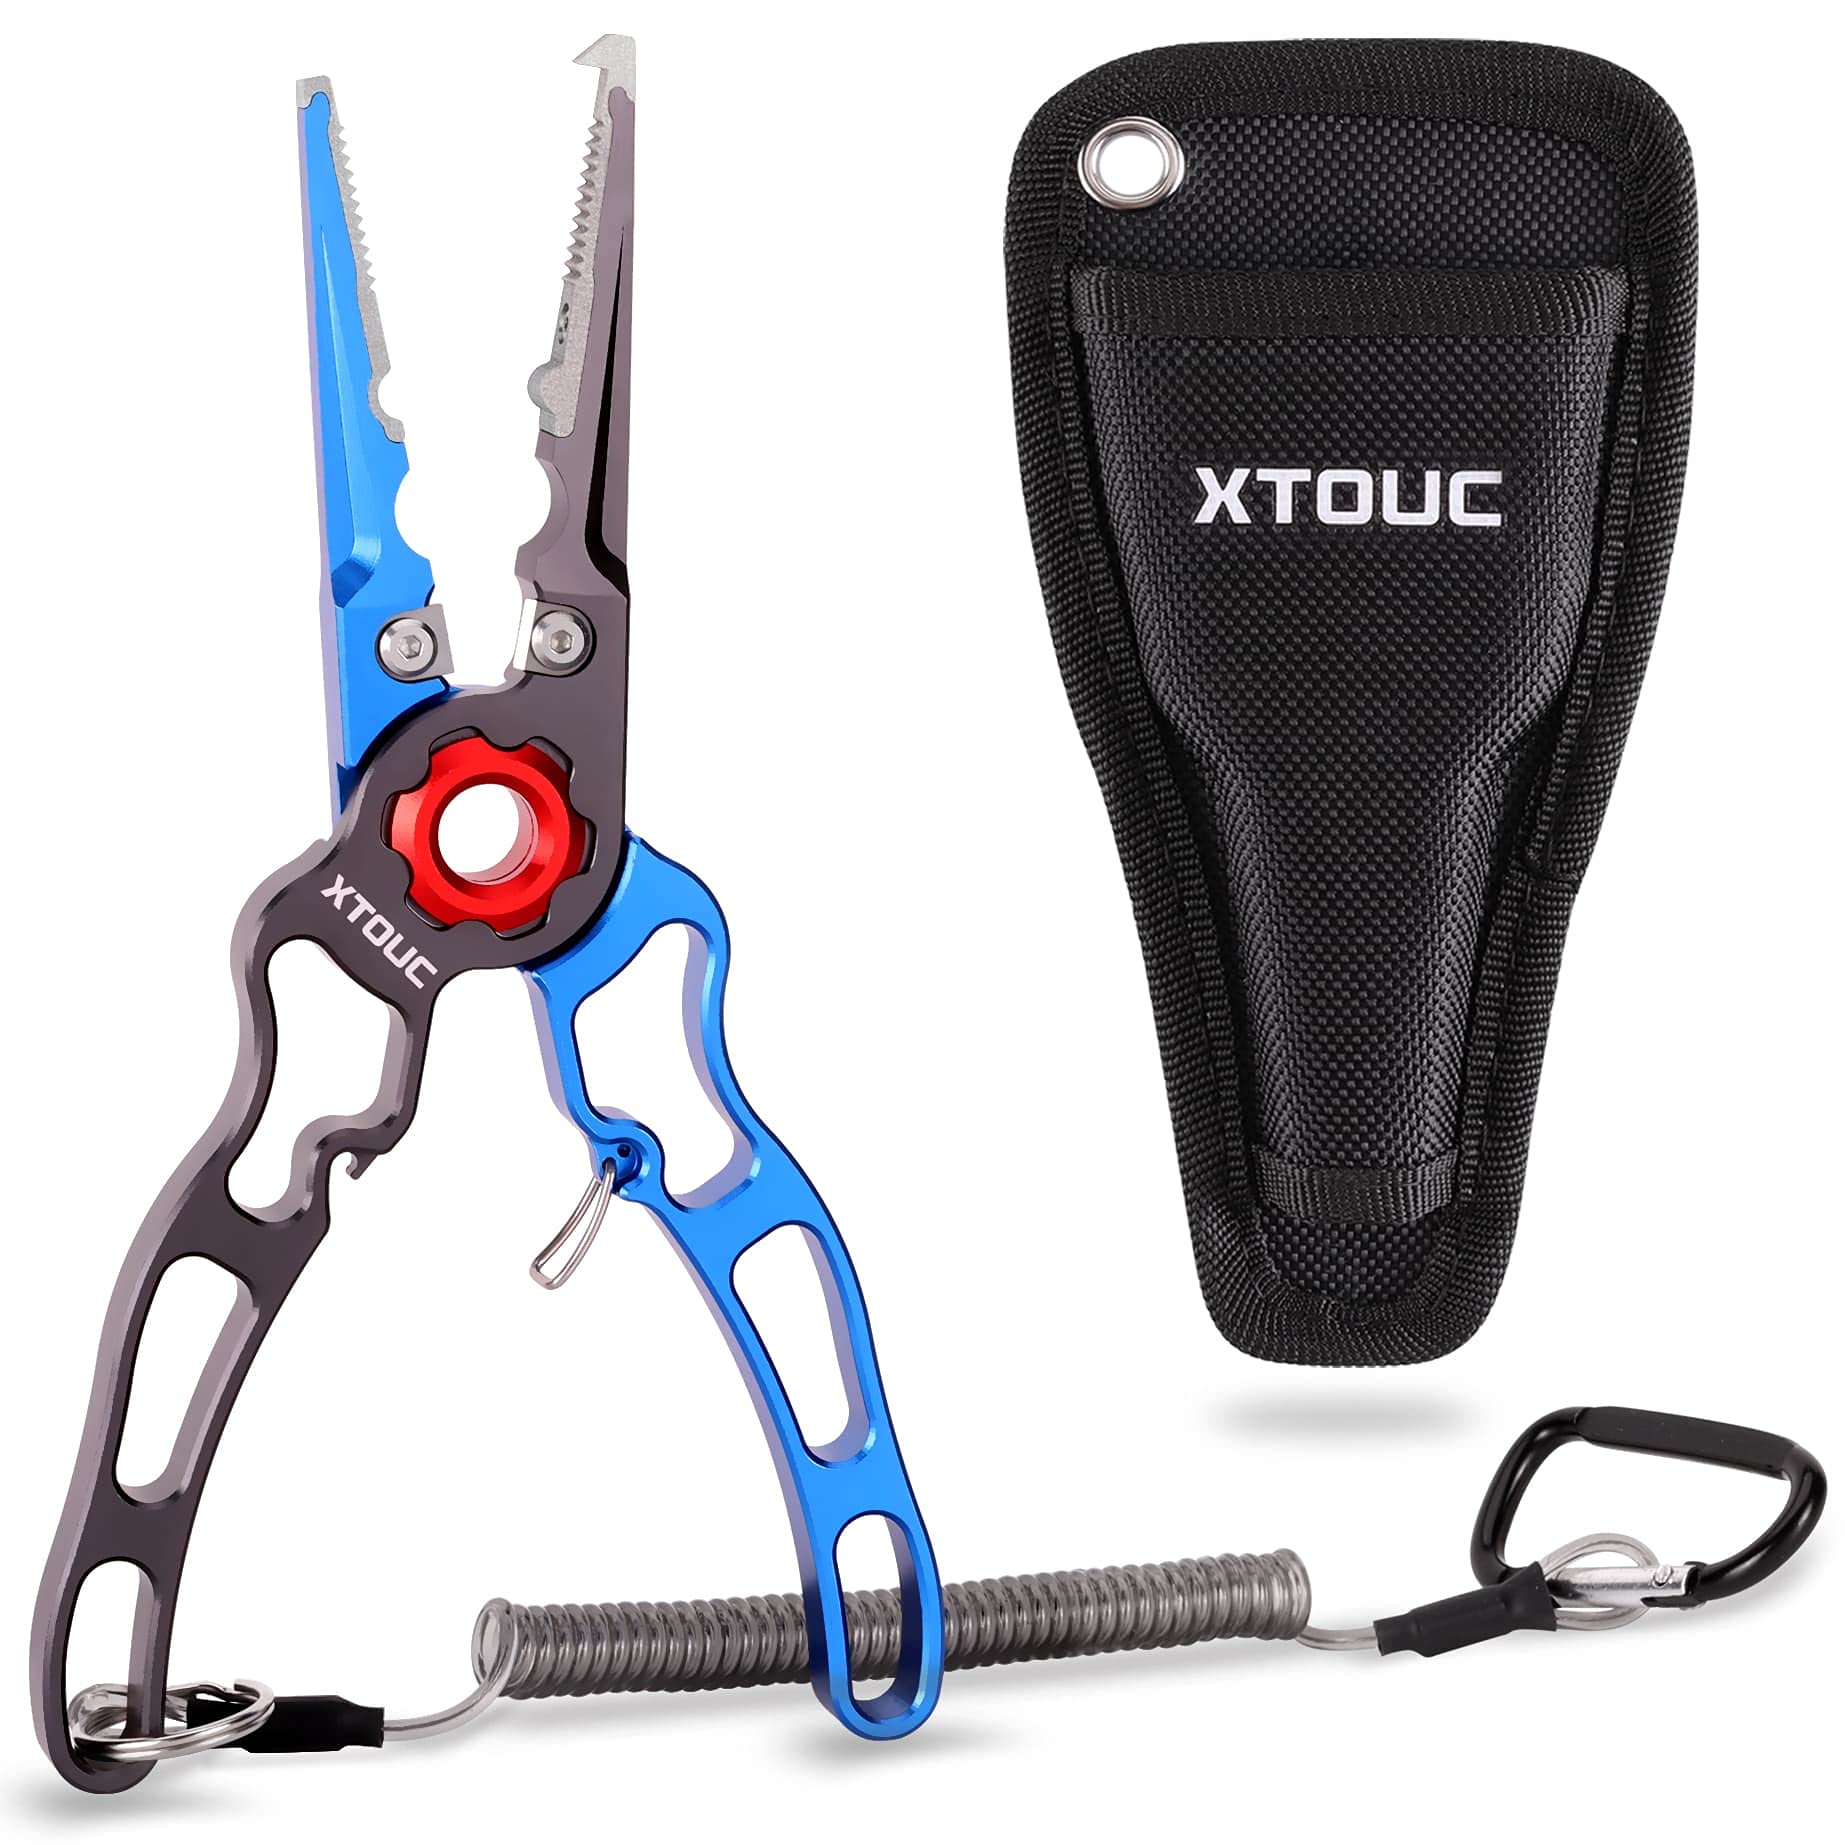 XTOUC Fishing Pliers, Titanium Alloy Clamp Head Fishing Gear,Saltwater  Resistant Fishing Tools, Hook Remover Braid Line Cutting and Split Ring  Pliers, with Sheath and Lanyard Blue&gray